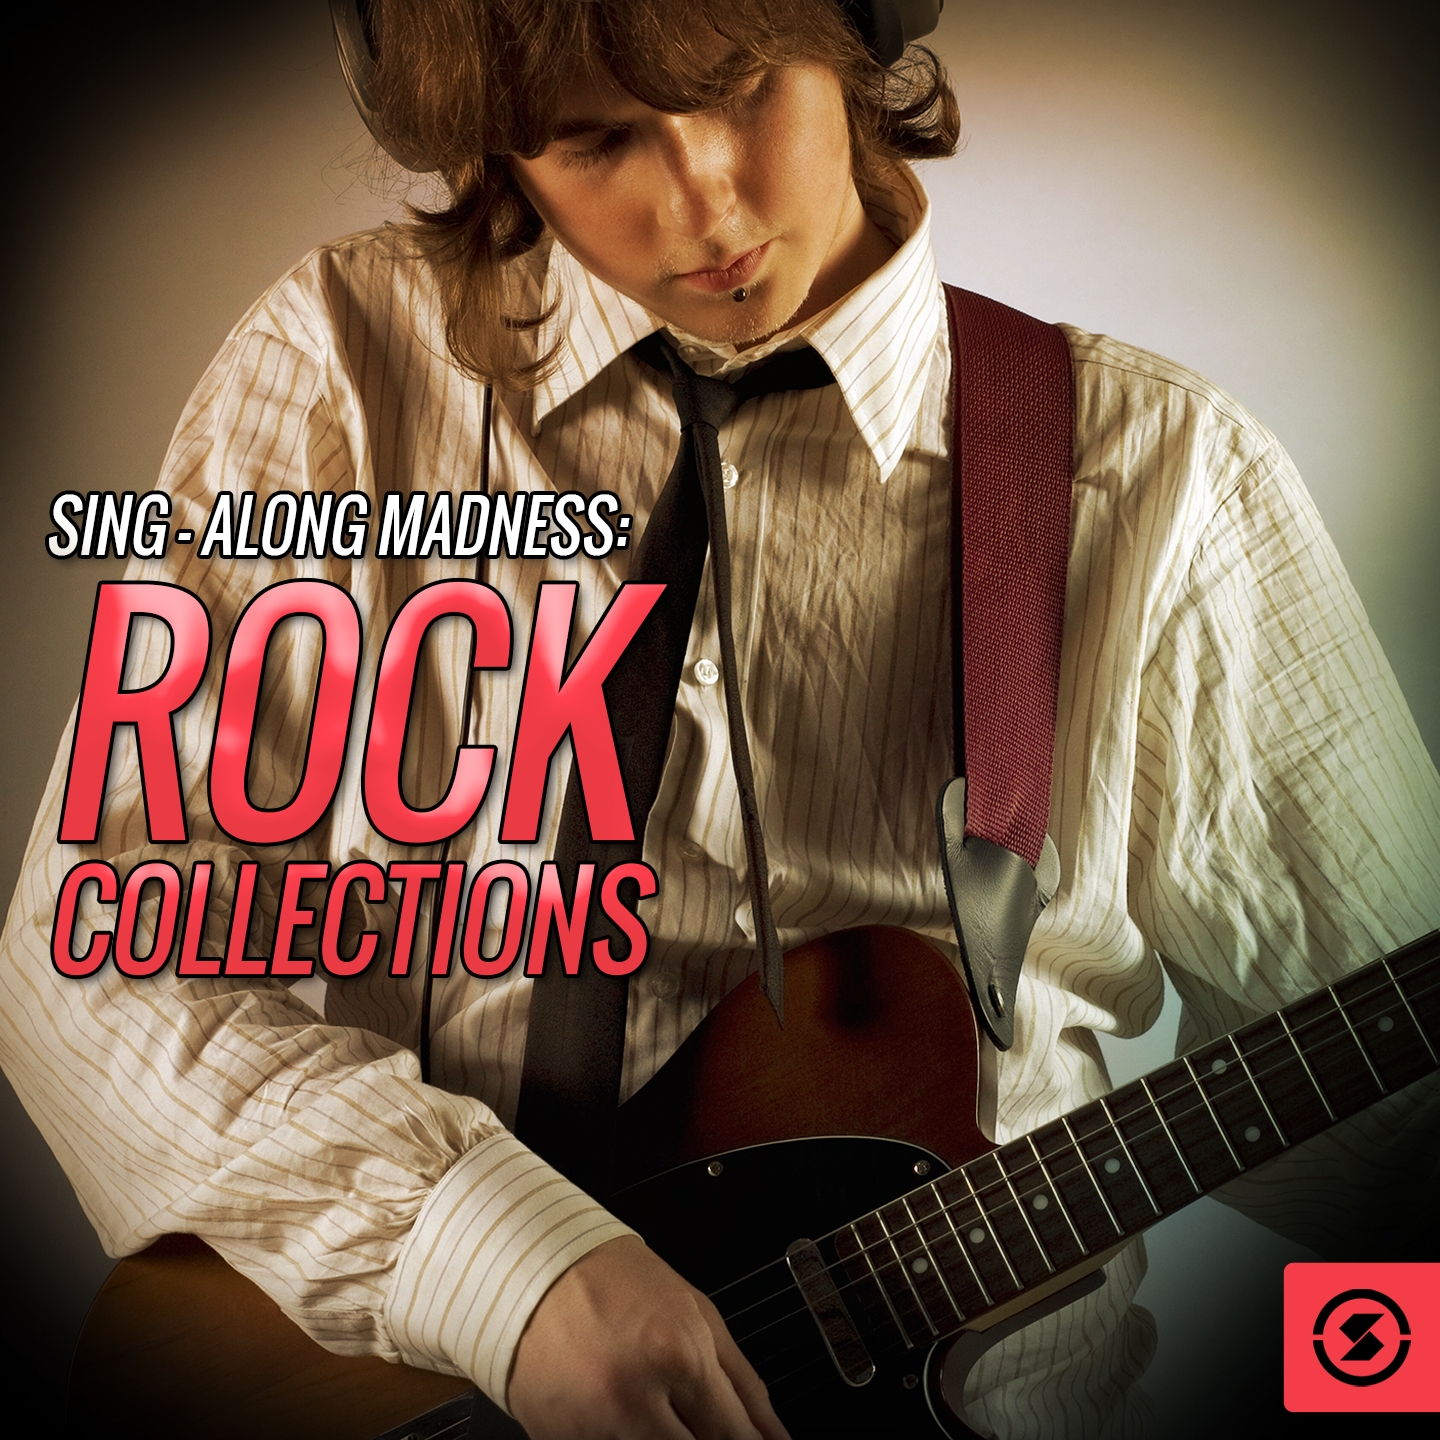 Sing - Along Madness: Rock Collections